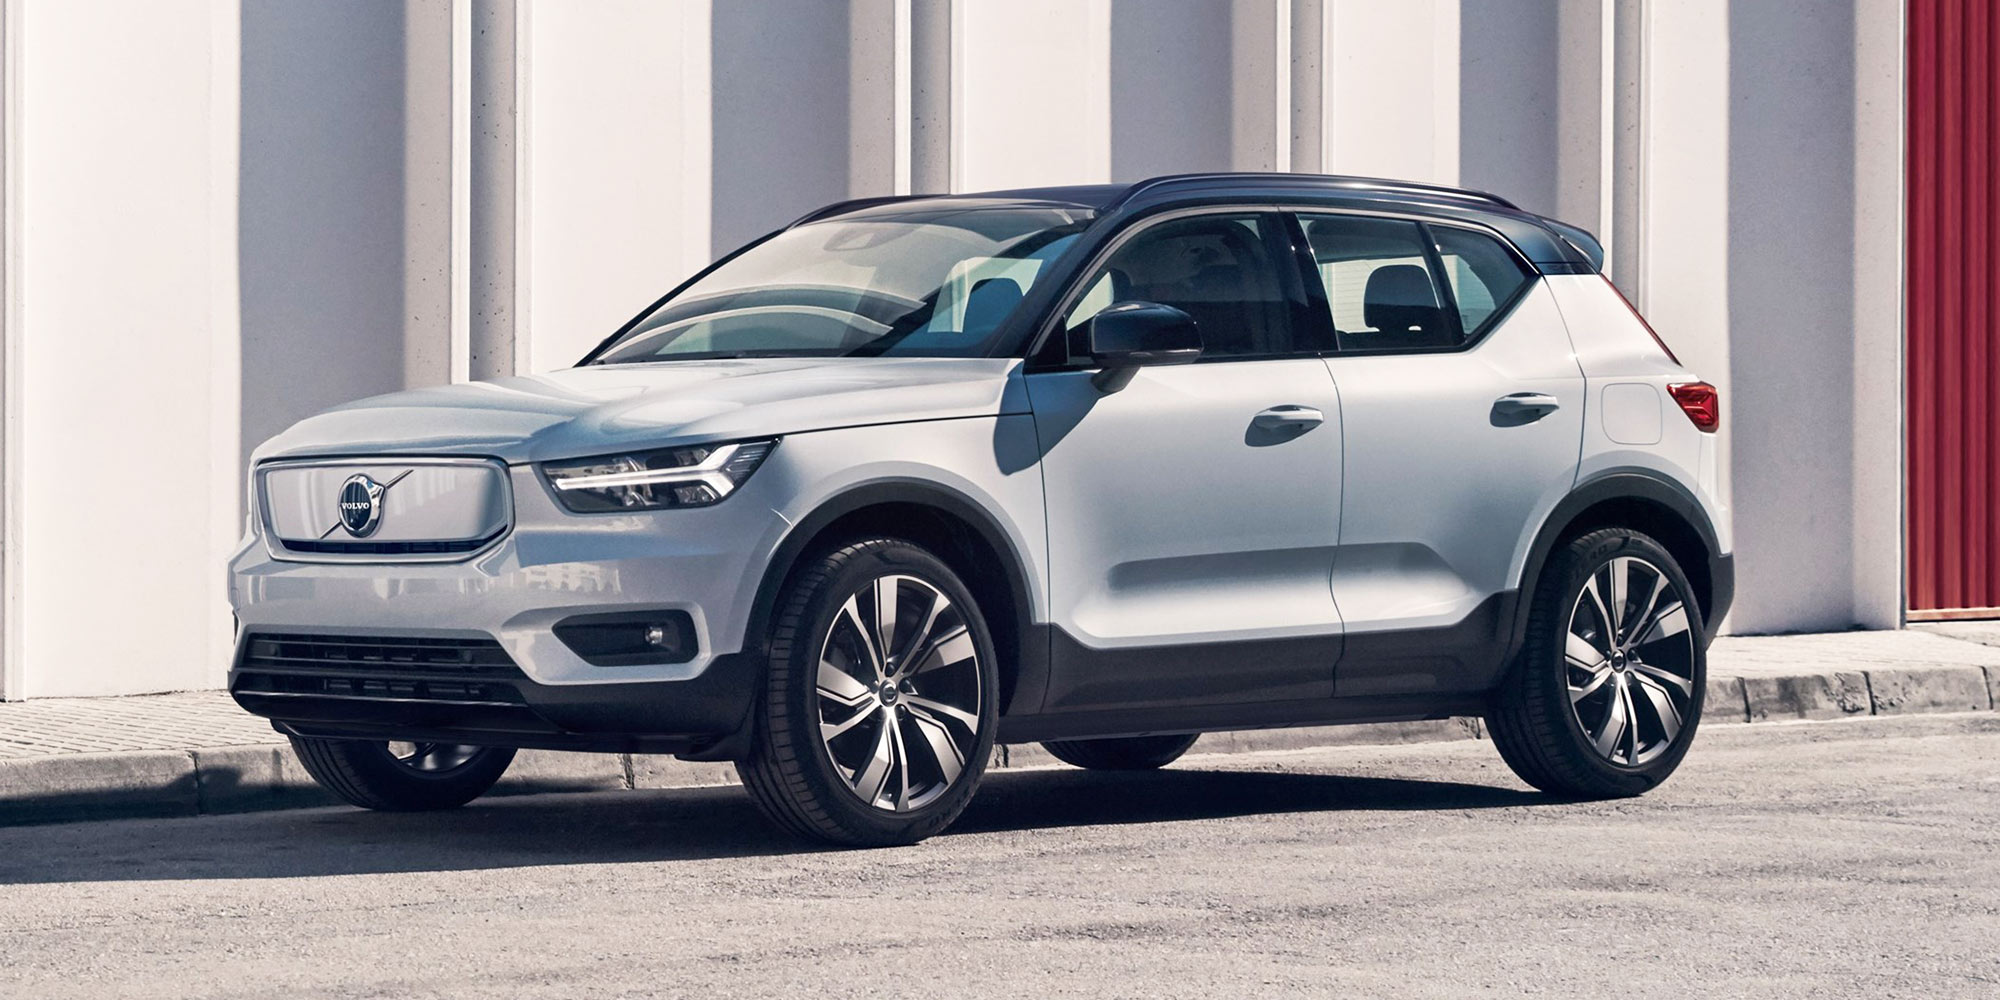 Volvo publishes walkaround video of impressive all-electric XC40 Recharge - Electrek